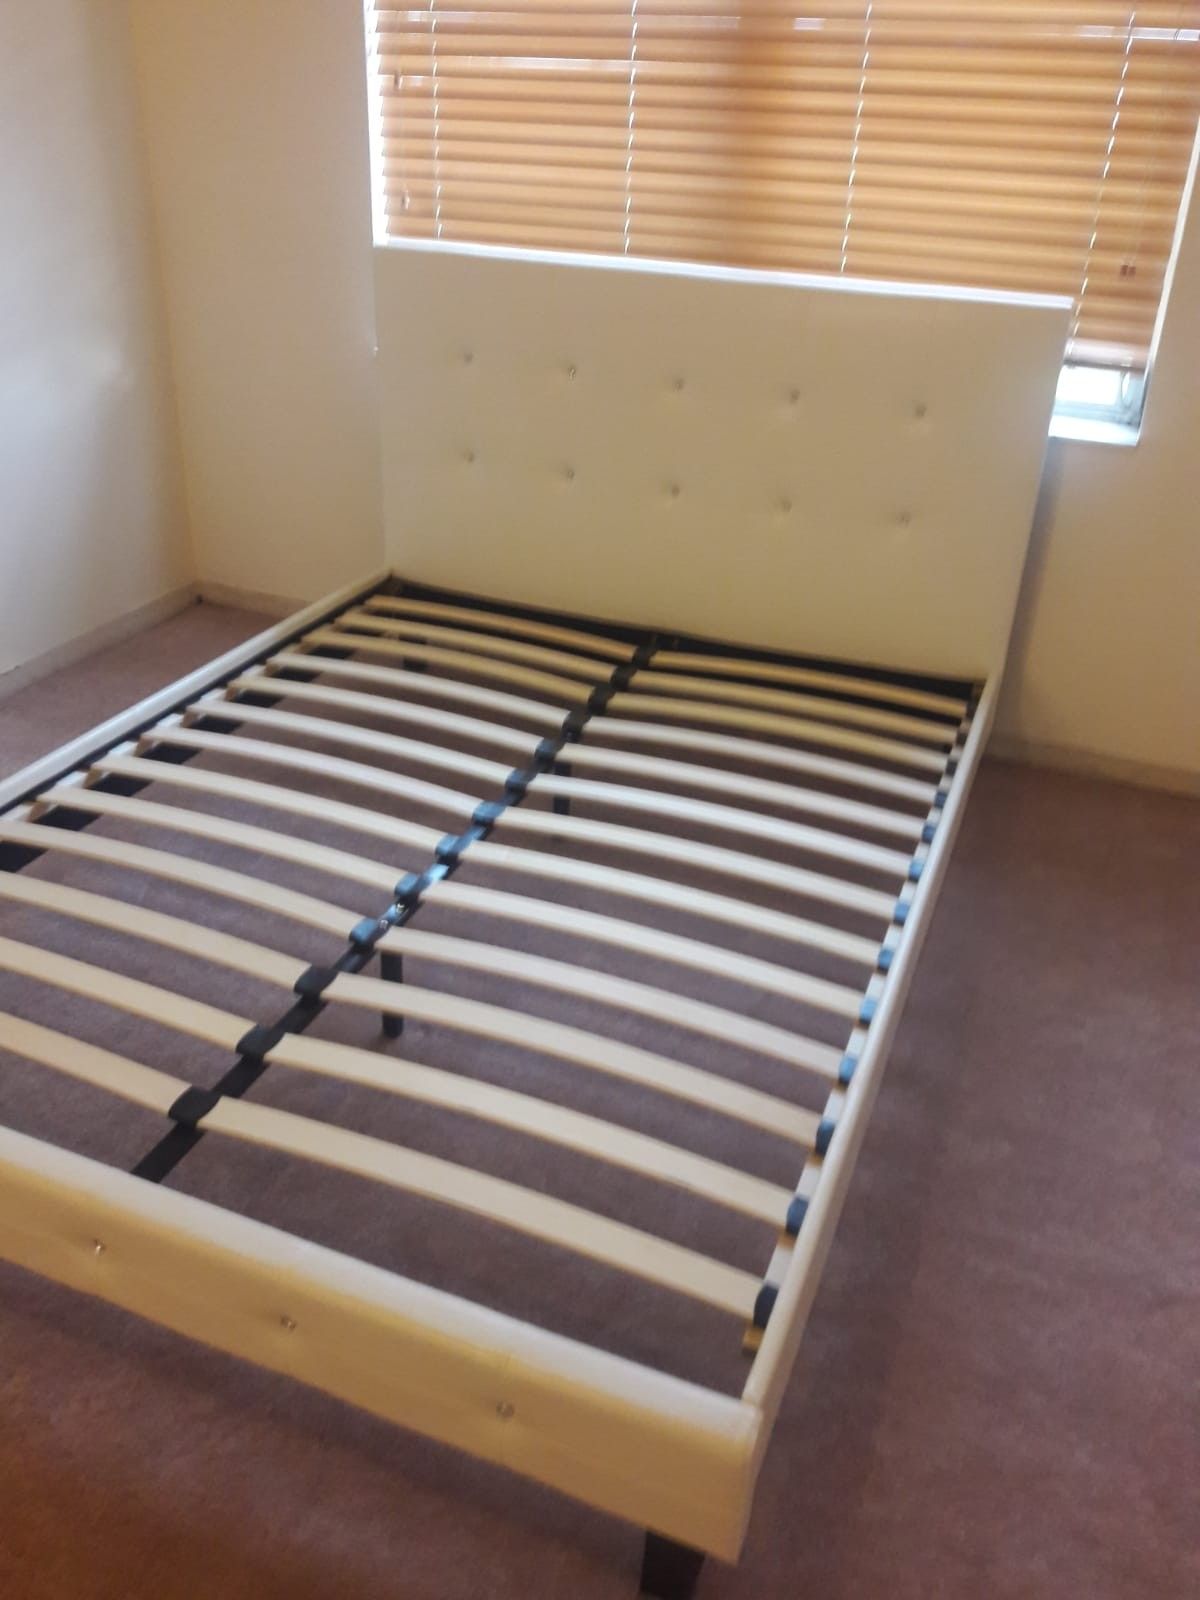 NEW QUEEN DIAMOND BED PLATFORM FRAME. LOCAL AREAS FREE DELIVERY 🚚